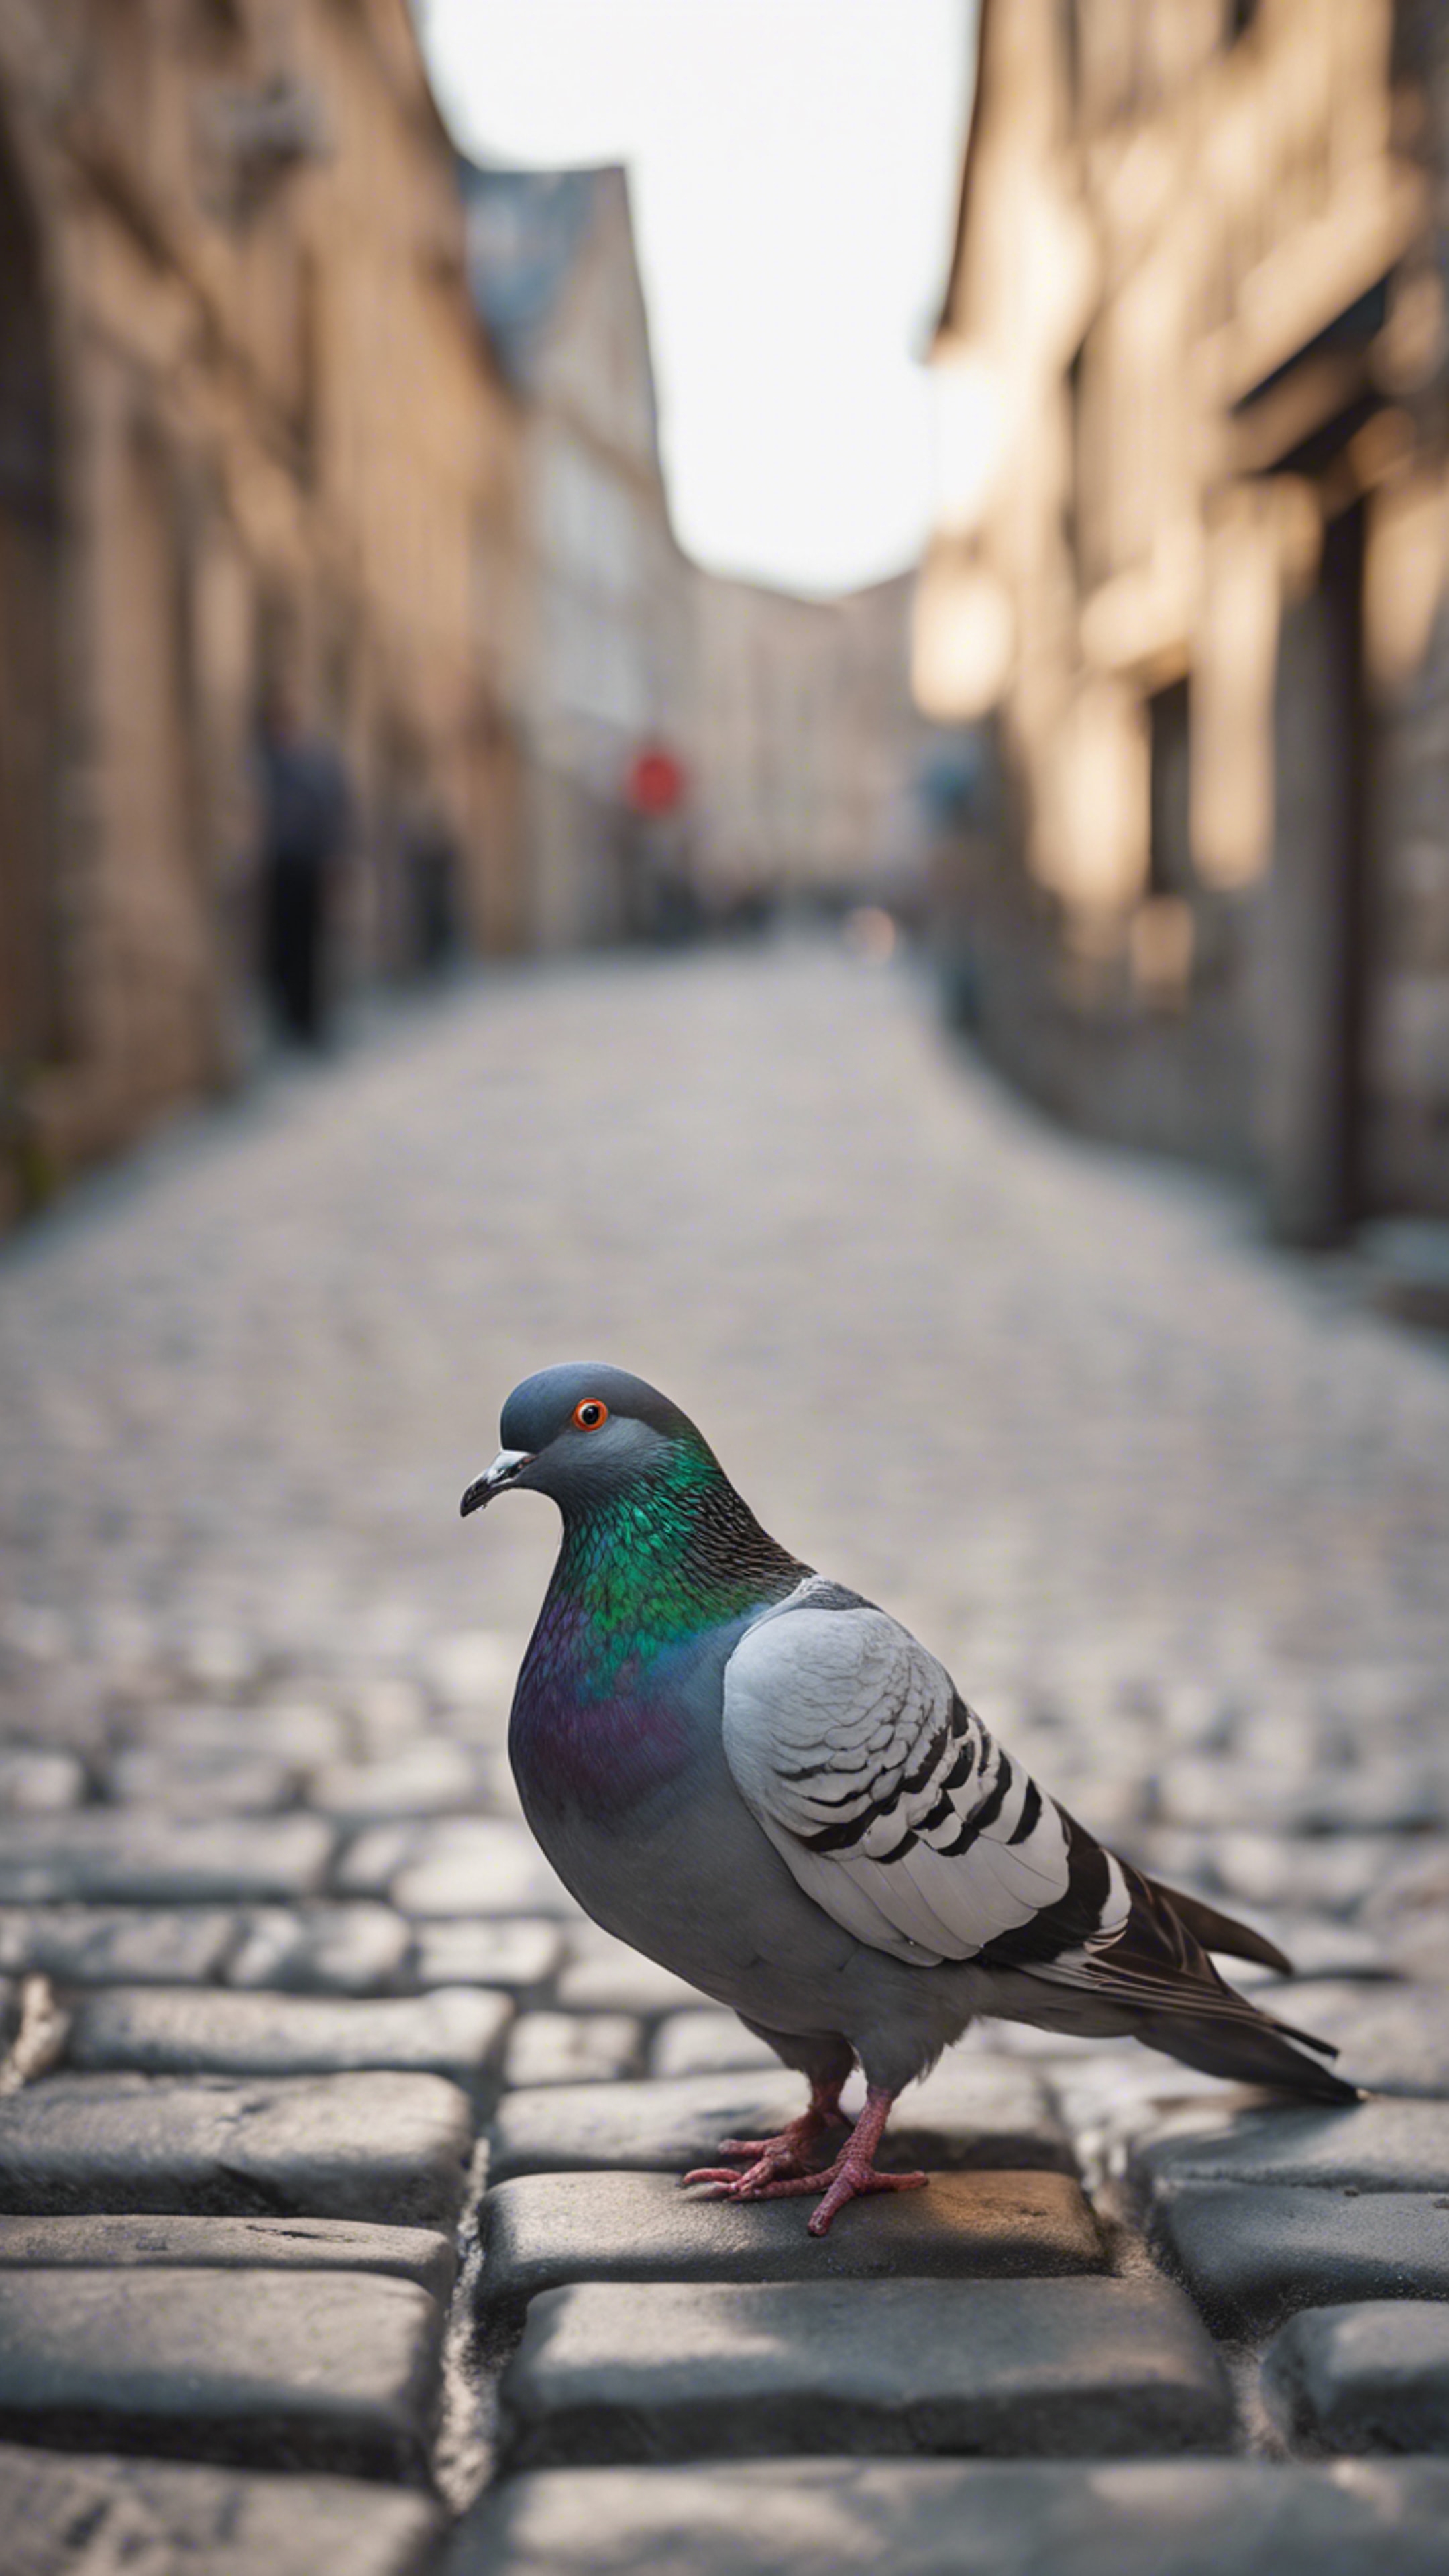 A pigeon standing on cobblestone street in the middle of an old city, its beautiful light gray plumage glistening. Wallpaper[03a93bb4226c4140ad33]